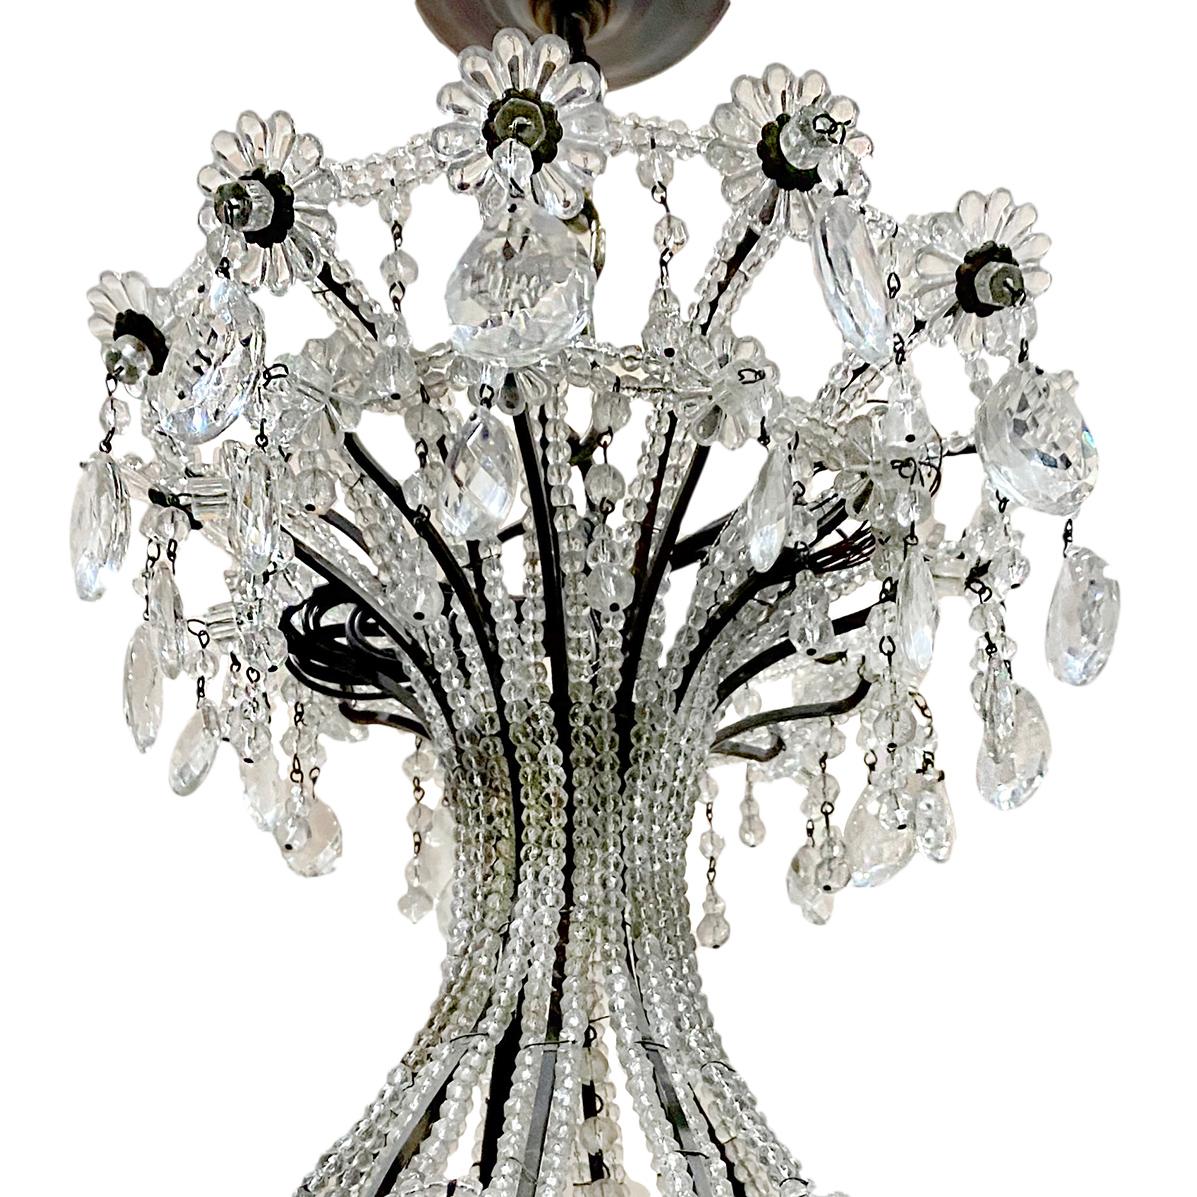 A large circa 1920's French twelve light beaded chandelier with crystal insets on body and applied beaded crystal flowers.

Measurements:
Current drop: 46